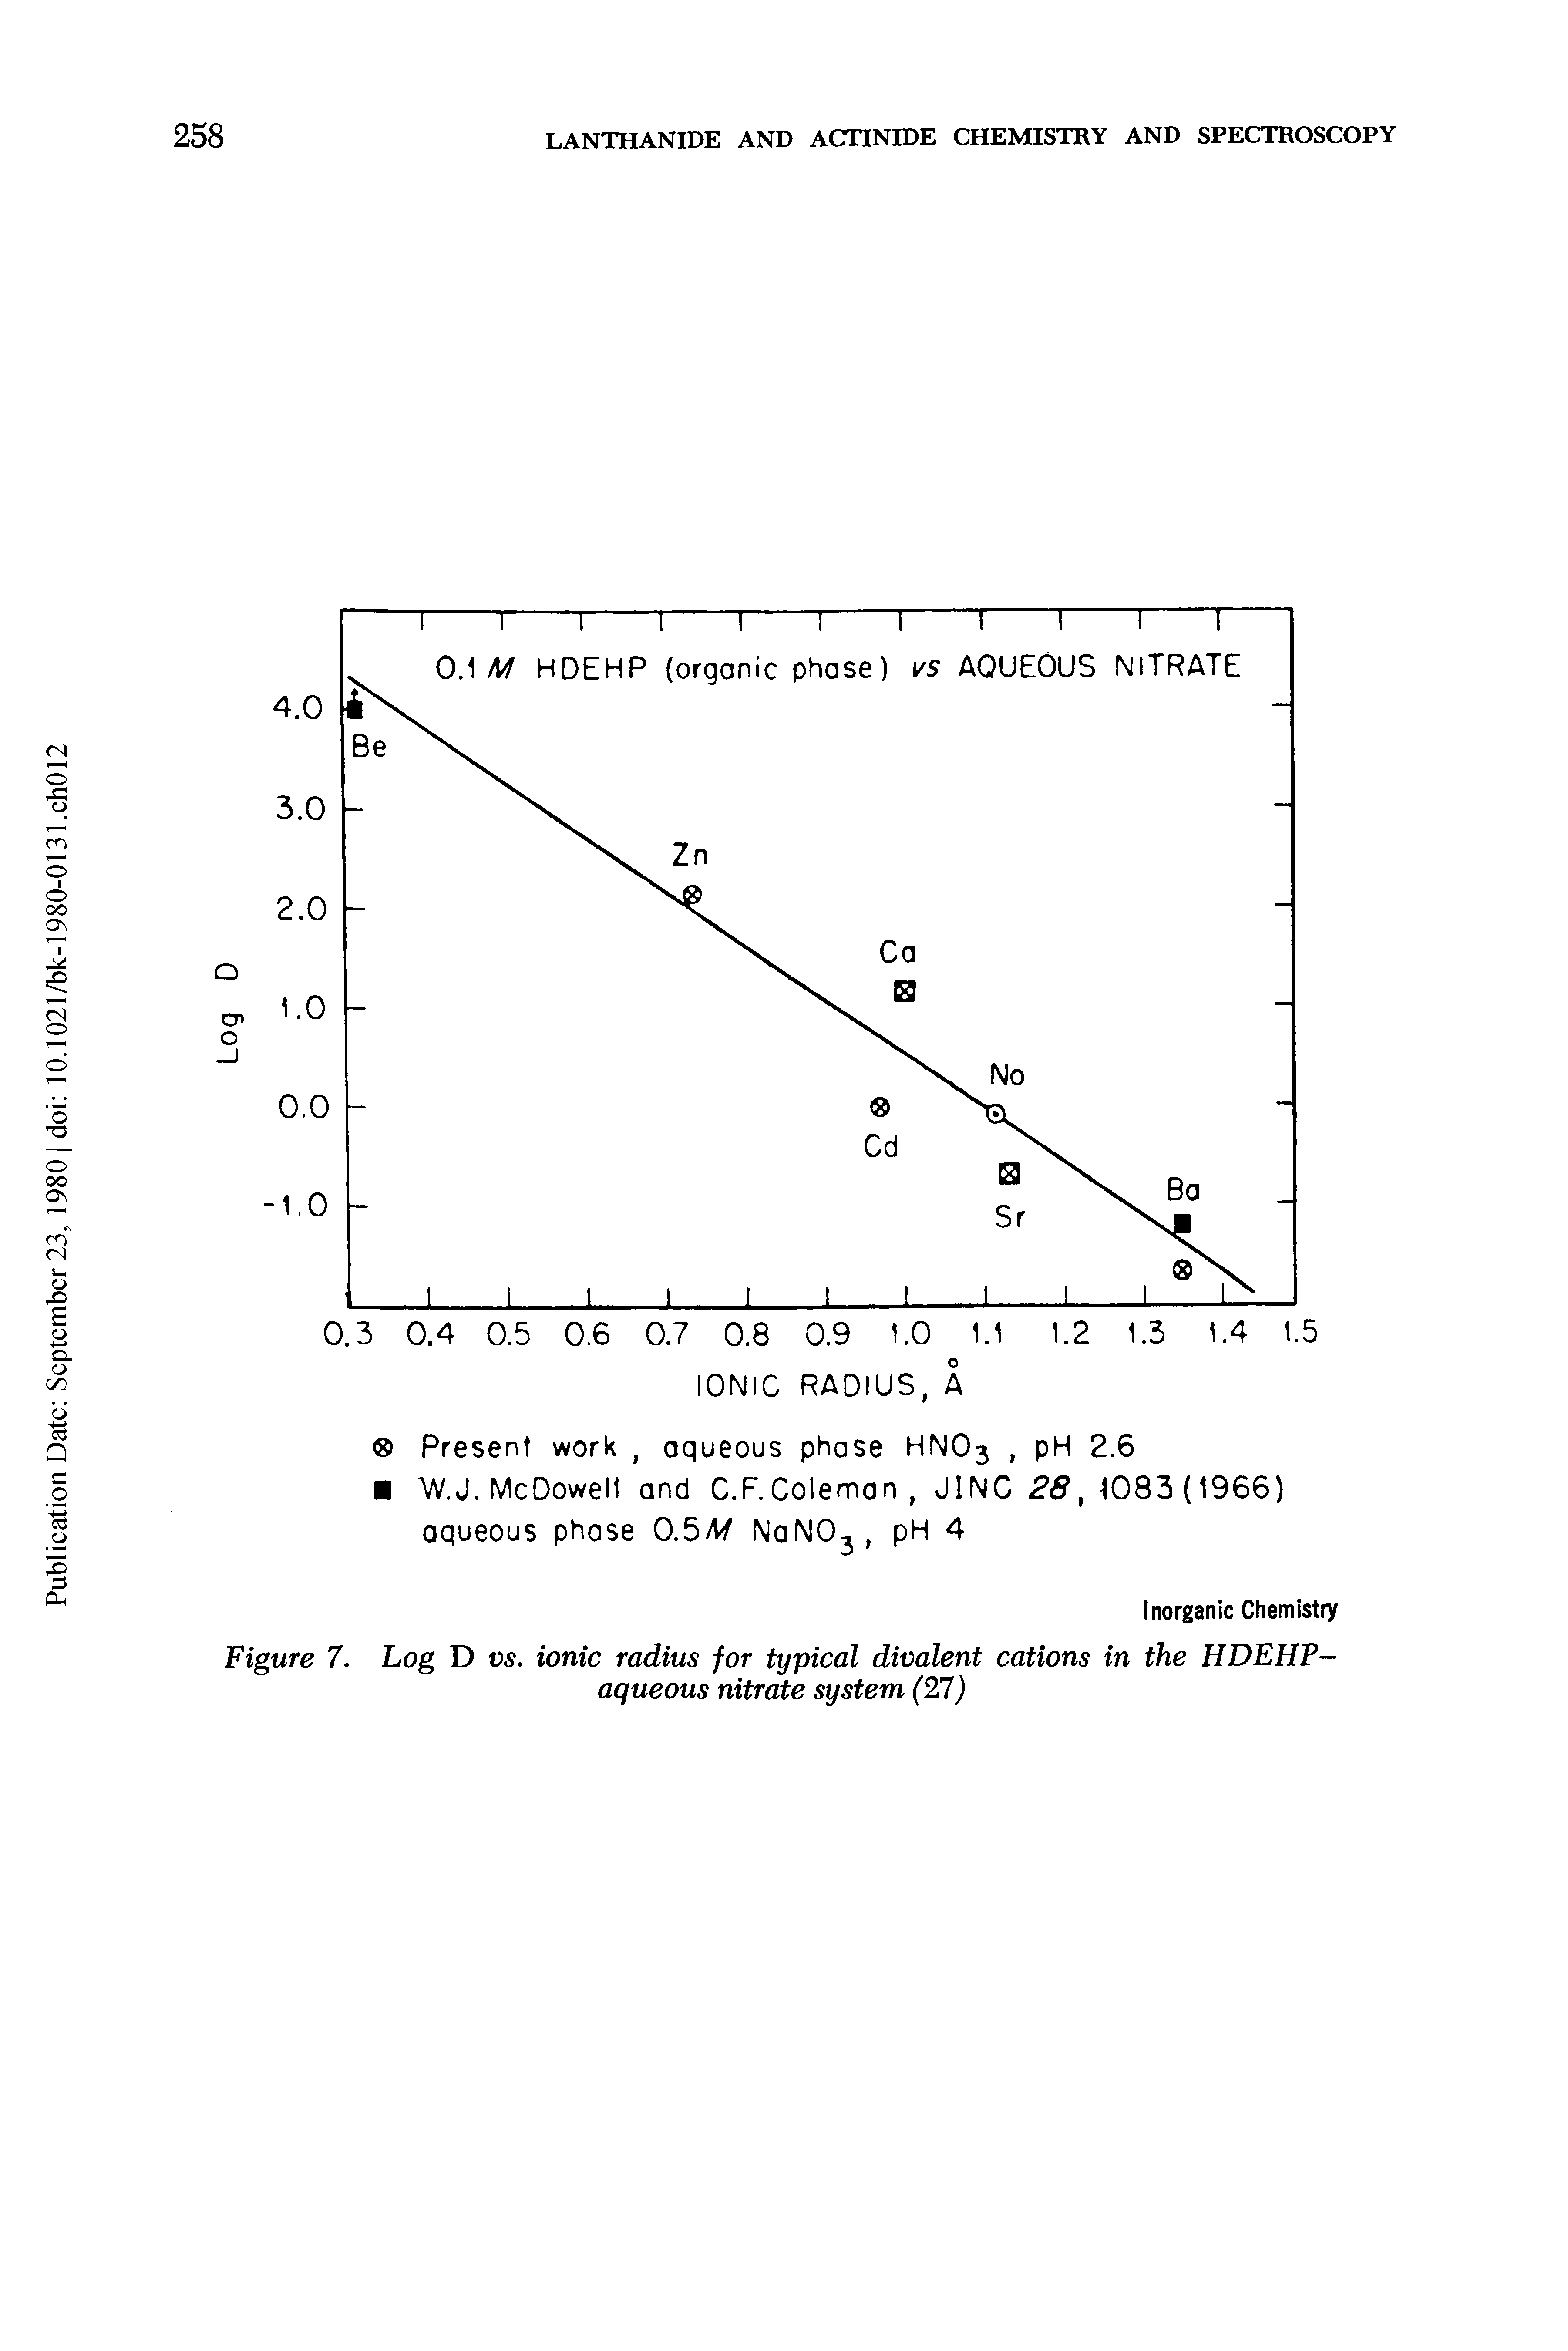 Figure 7. Log D vs. ionic radius for typical divalent cations in the HDEHP-aqueous nitrate system (21)...